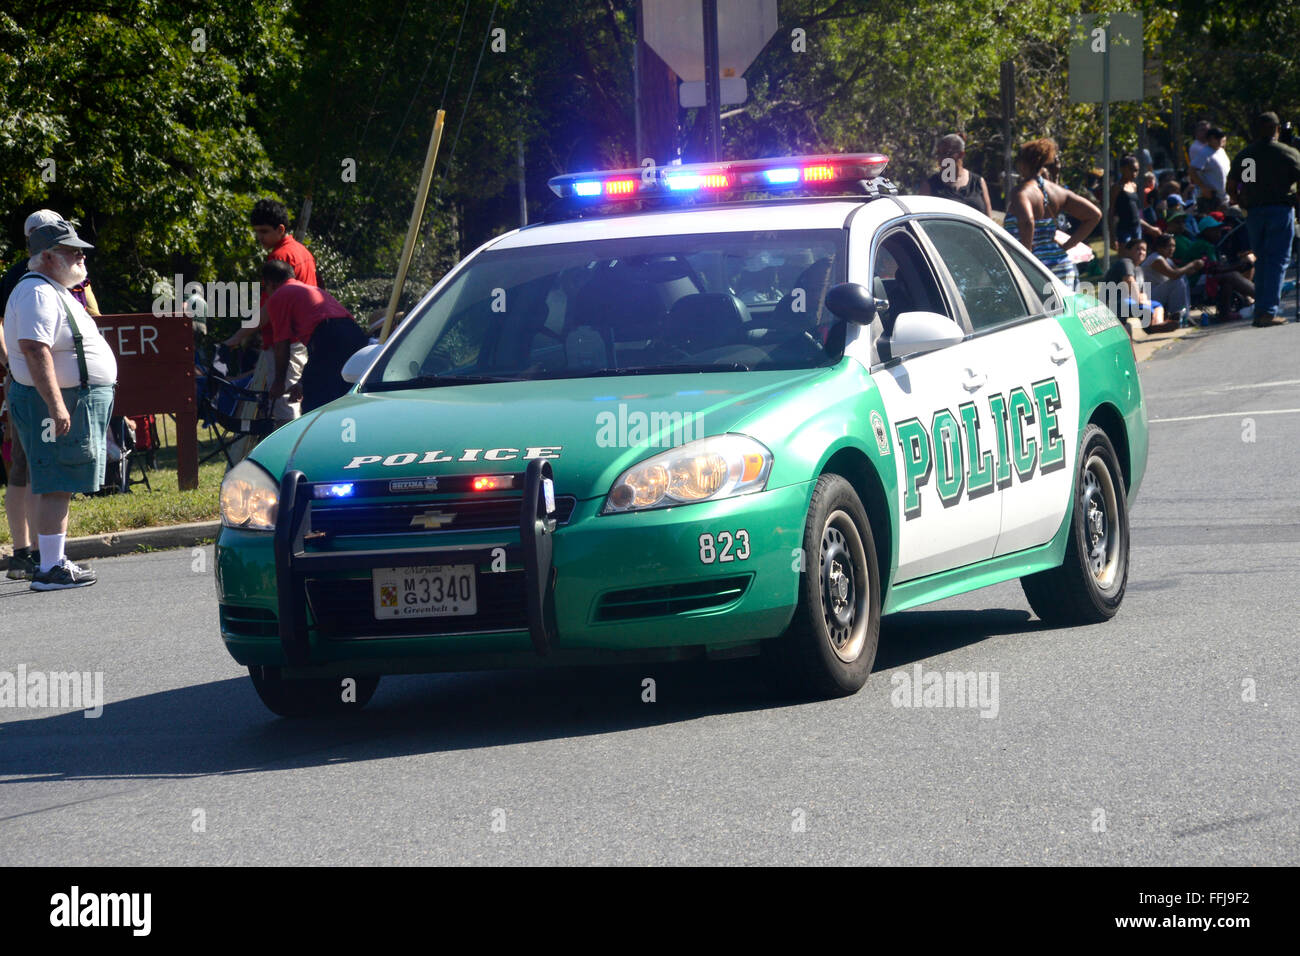 Police car on a emergency call in Greenbelt, Md Stock Photo